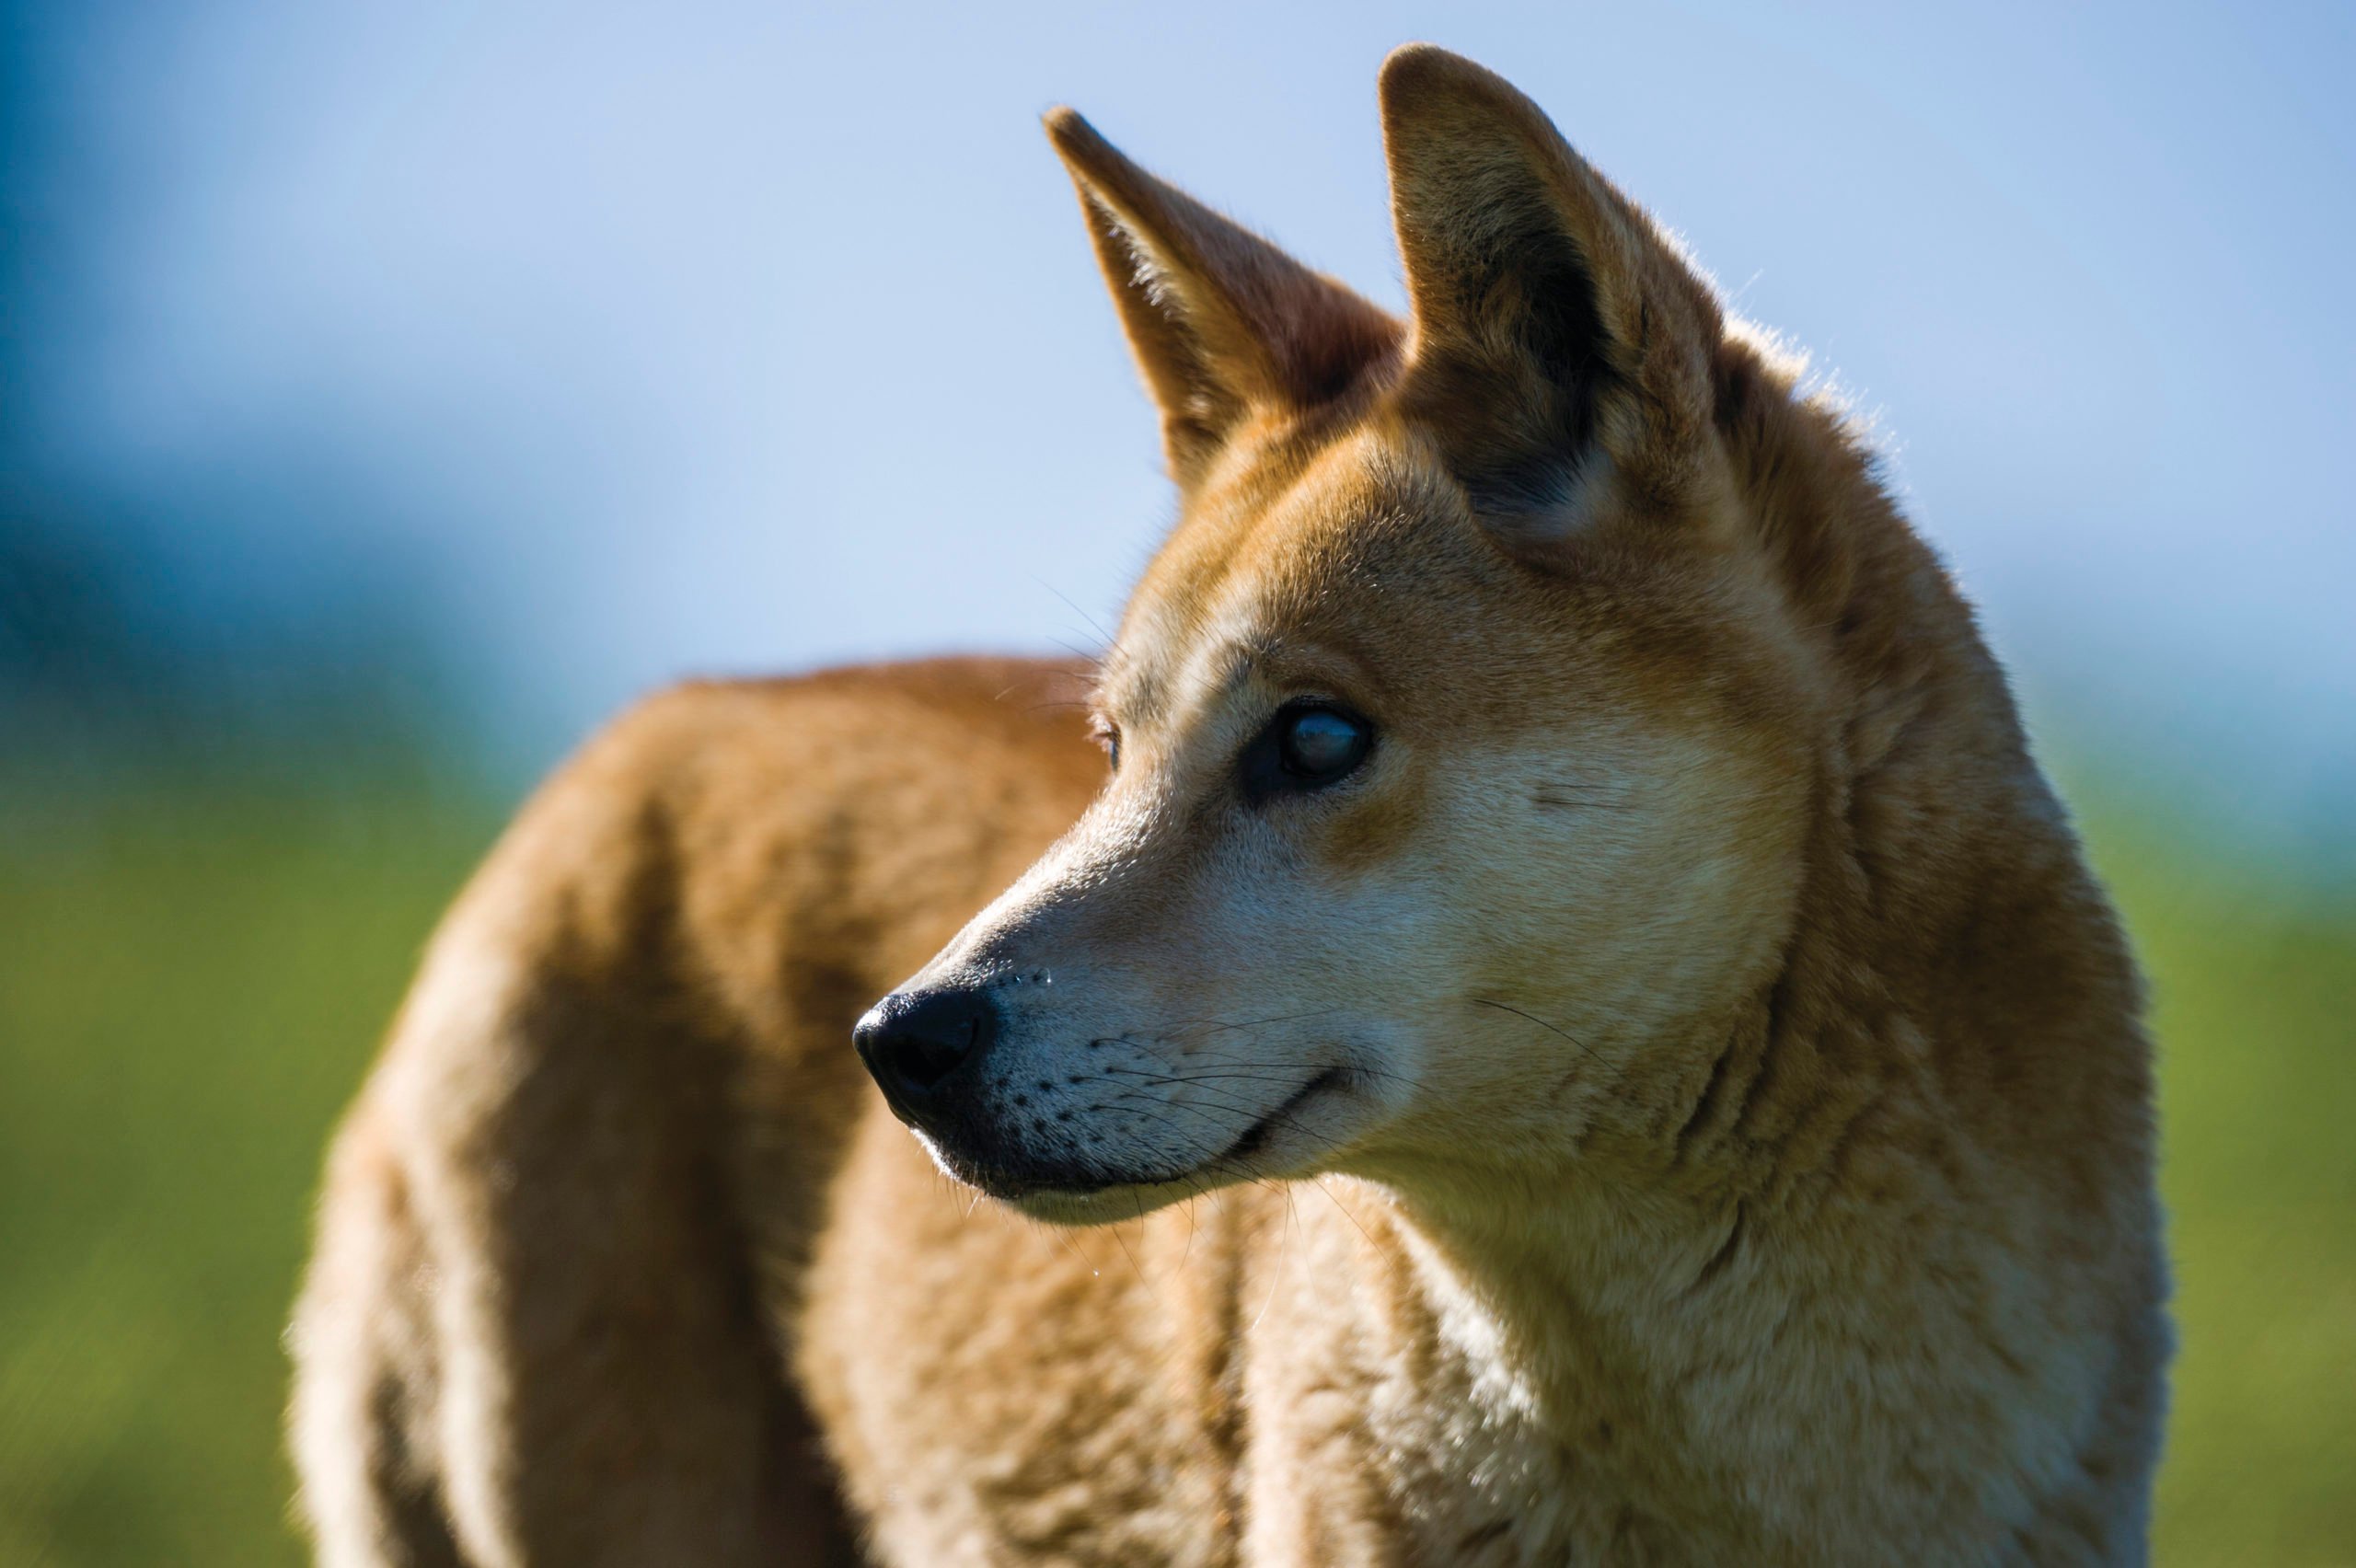 caravan collegegeld Statistisch Dingoes are genetically different from domestic dogs, new research reveals  - Australian Geographic